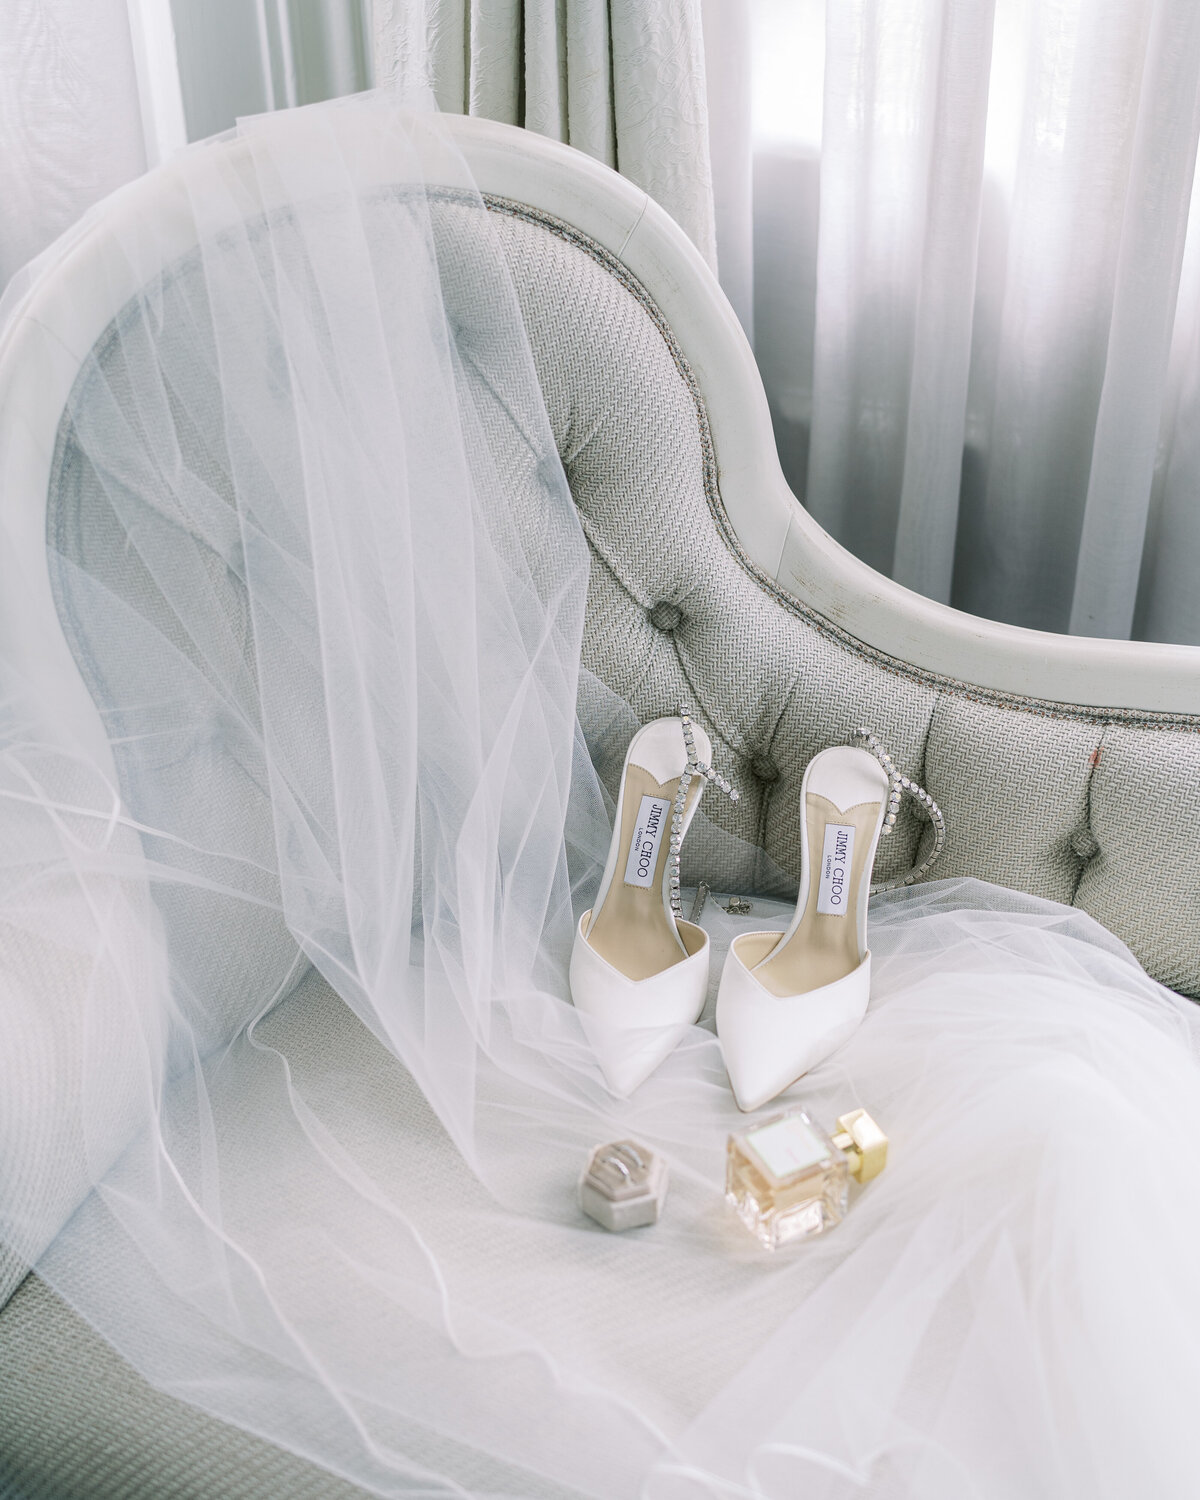 Jimmy Choo wedding shoes, veil and perfume at Hedsor House